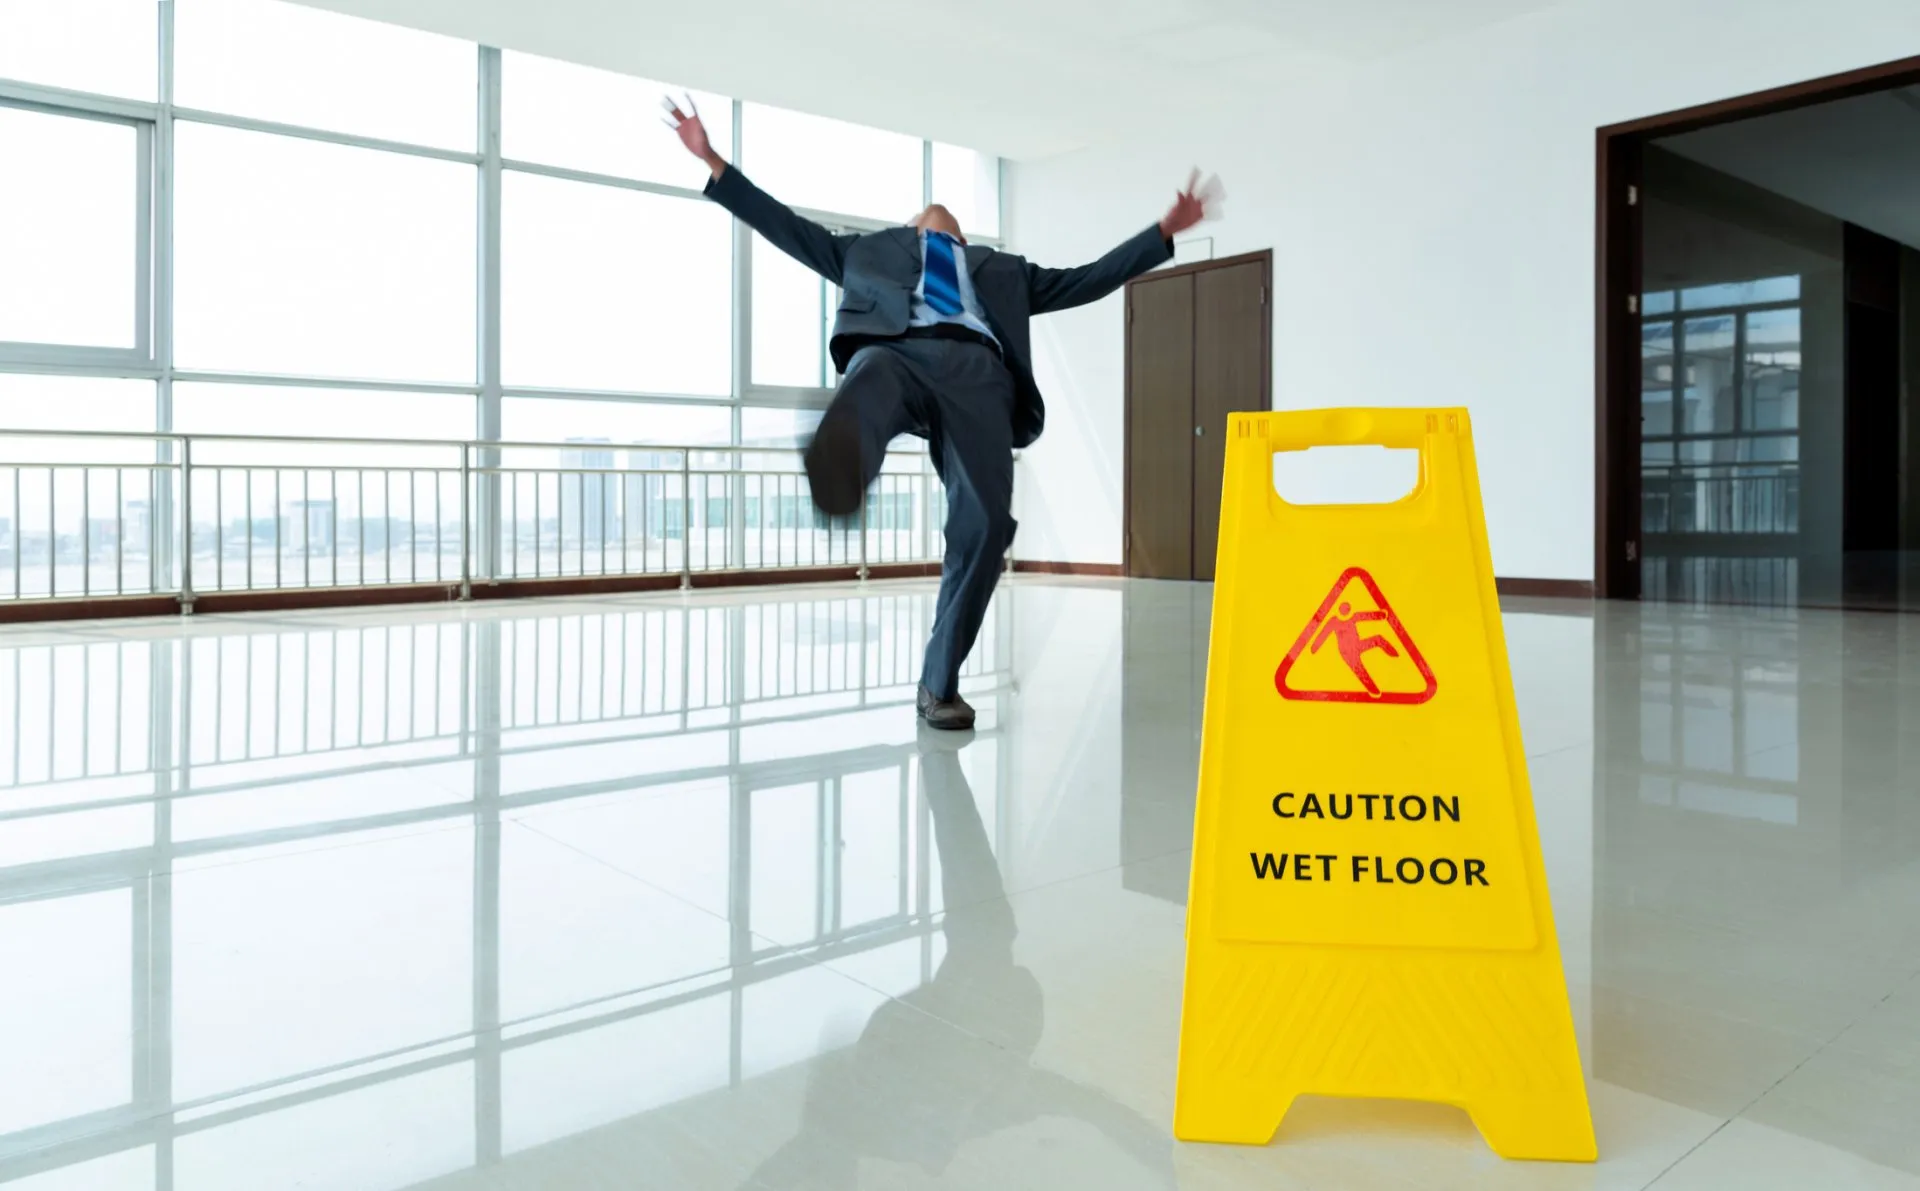 photo taken of the wet floor sign board and a person slipped and falling in the background.